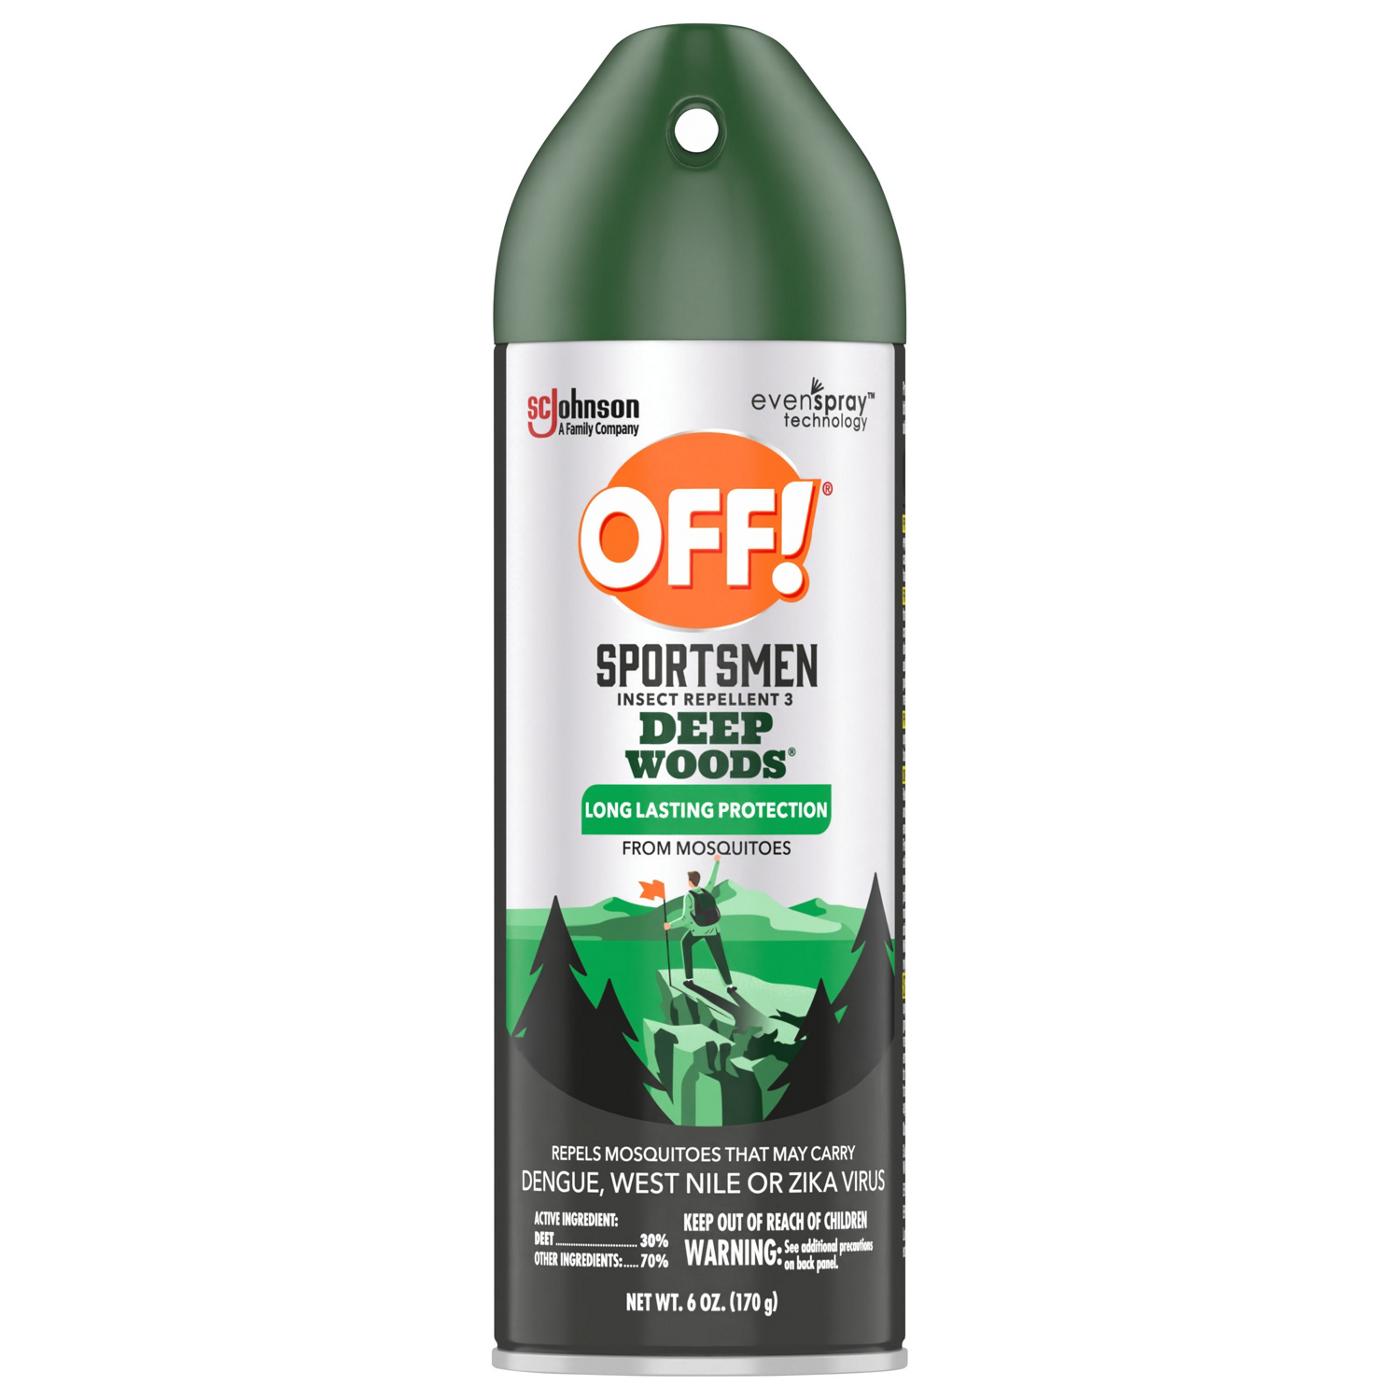 Off! Sportsmen Deep Woods Insect Repellent 3; image 1 of 2